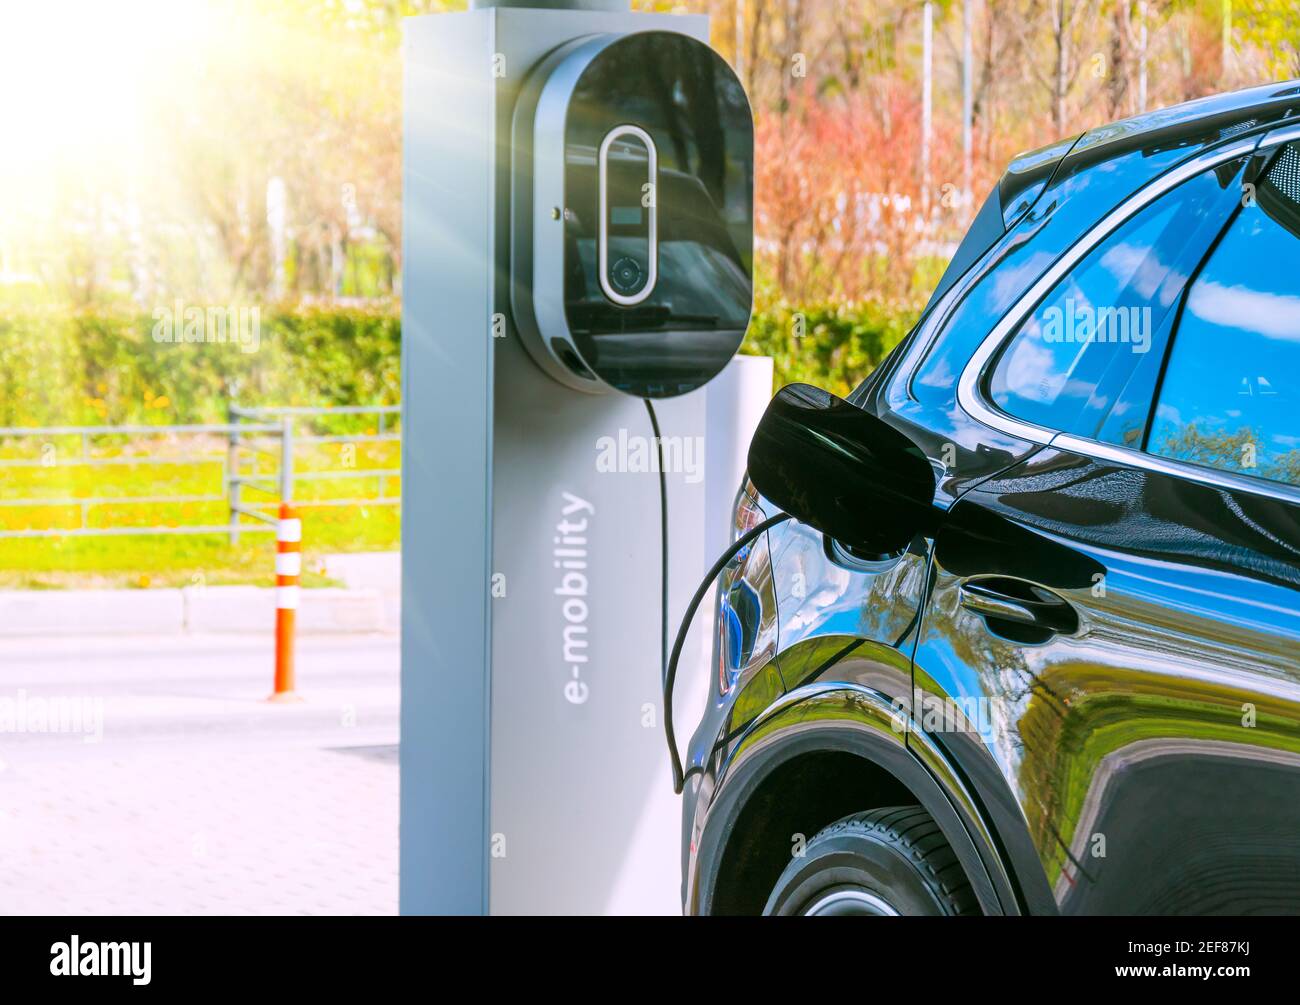 Refueling for cars e-mobility. Charging an electric car at hybrid engine gasoline and electricity. Sunlight as an electric renewable energy concept Stock Photo